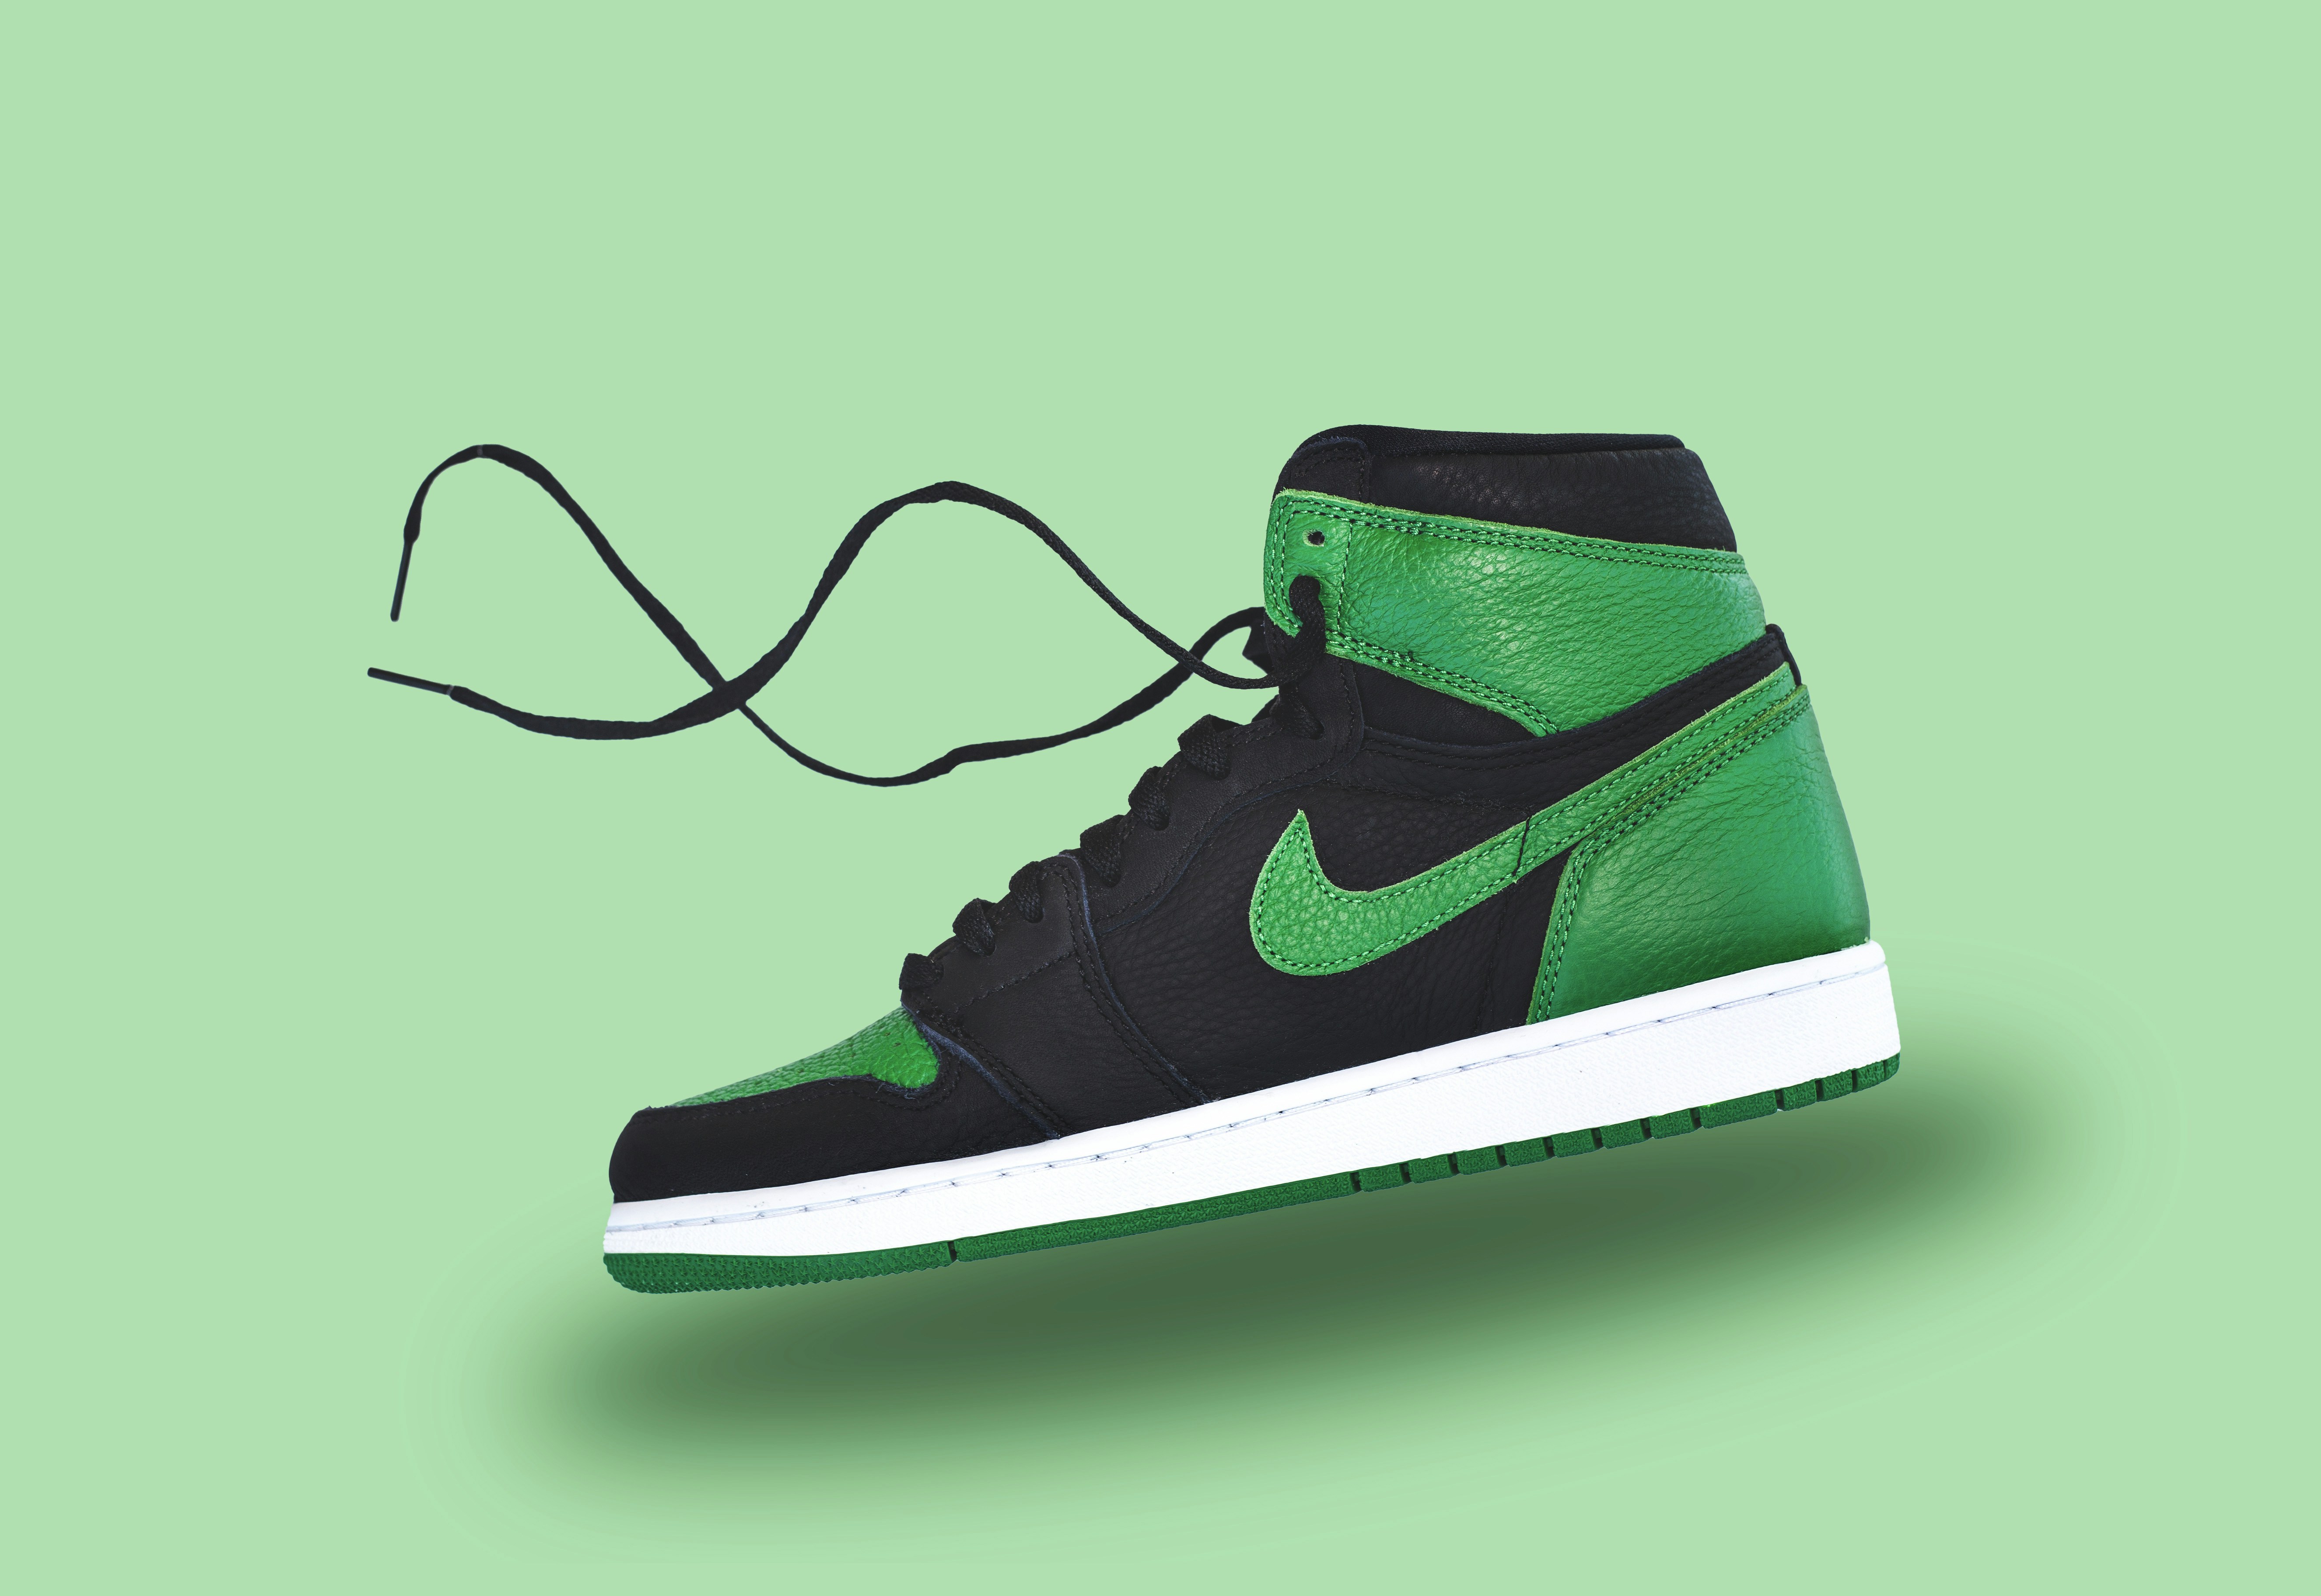 nike high top athletic shoes